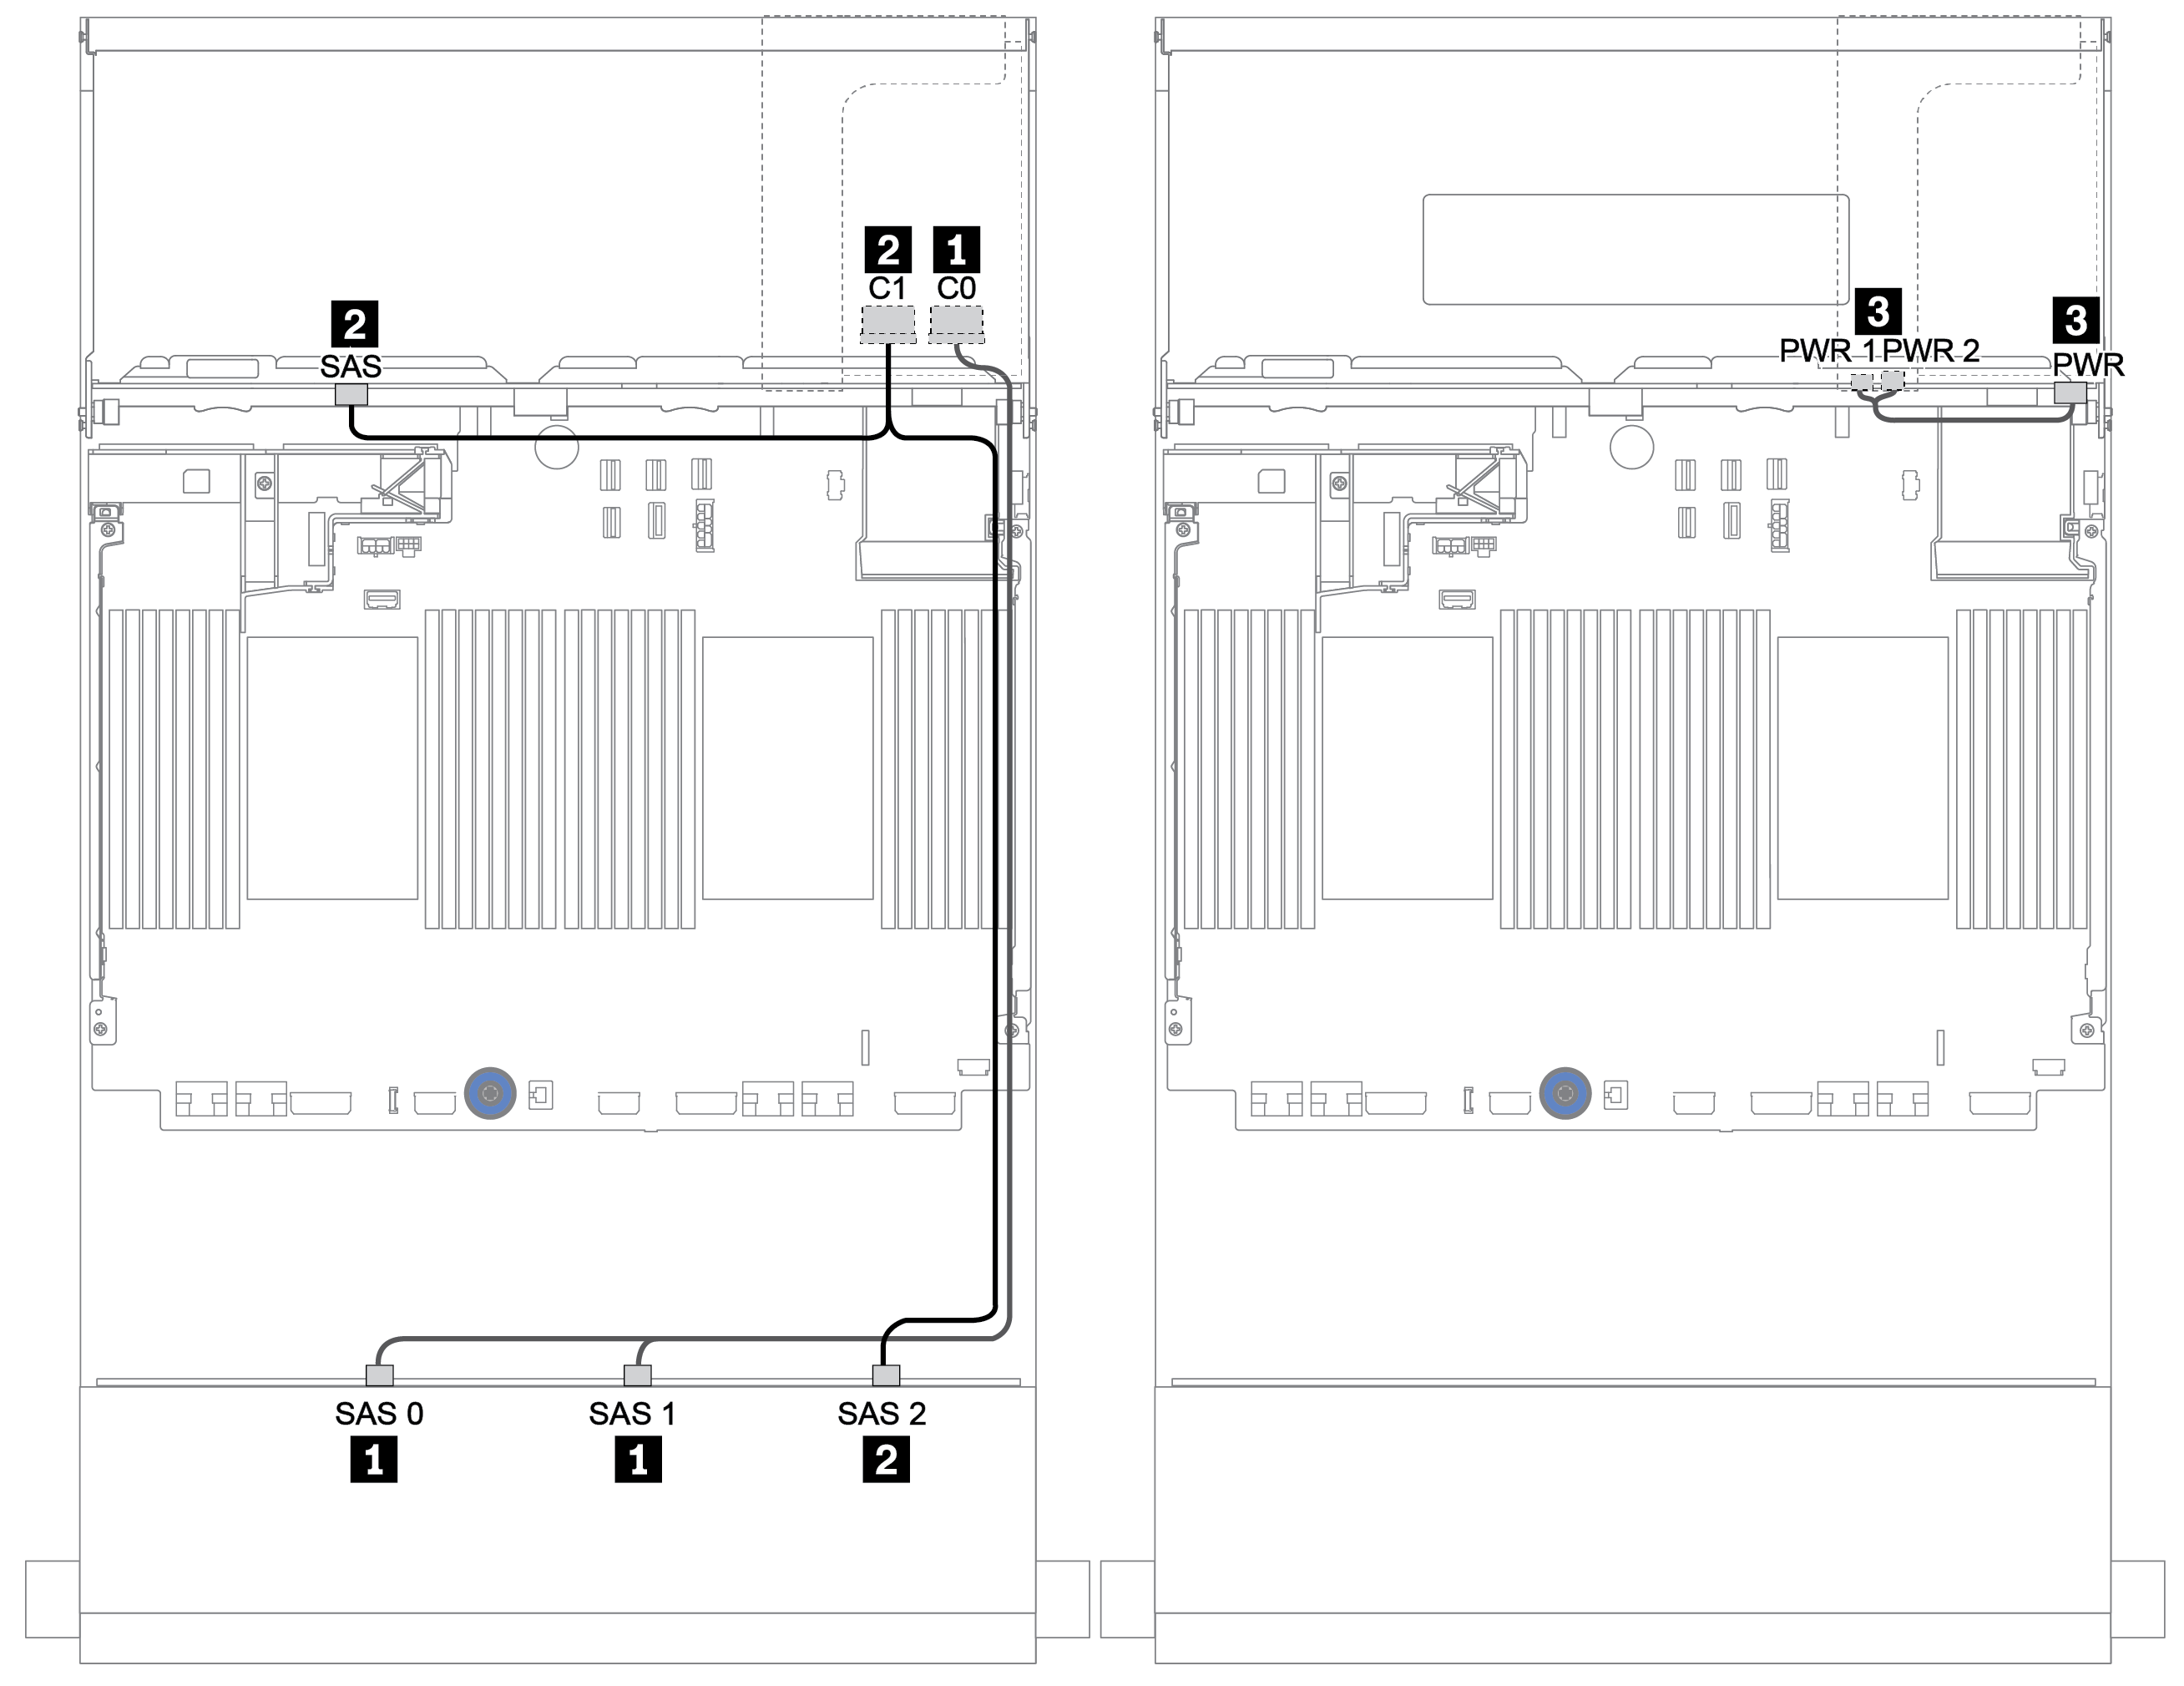 Cable routing for the 12 x 3.5-inch SAS/SATA configuration with a 4 x 3.5-inch SAS/SATA rear backplane